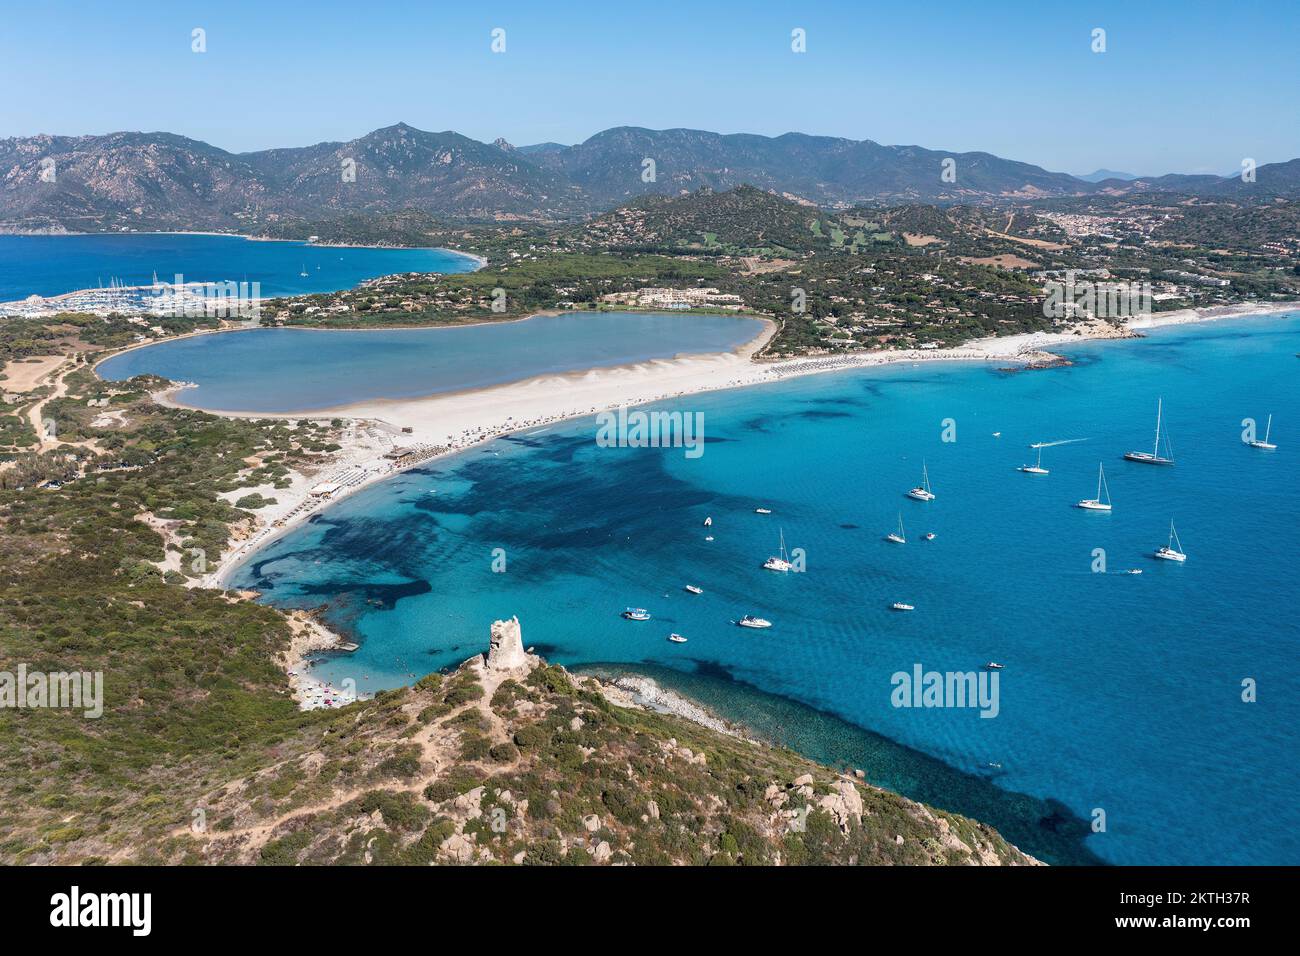 Aerial view of Spiaggia di Porto Giunco, a beautiful bay near a 17th century watchtower, The Aragonese Tower of Porto Giunco, in Sardinia, Italy Stock Photo